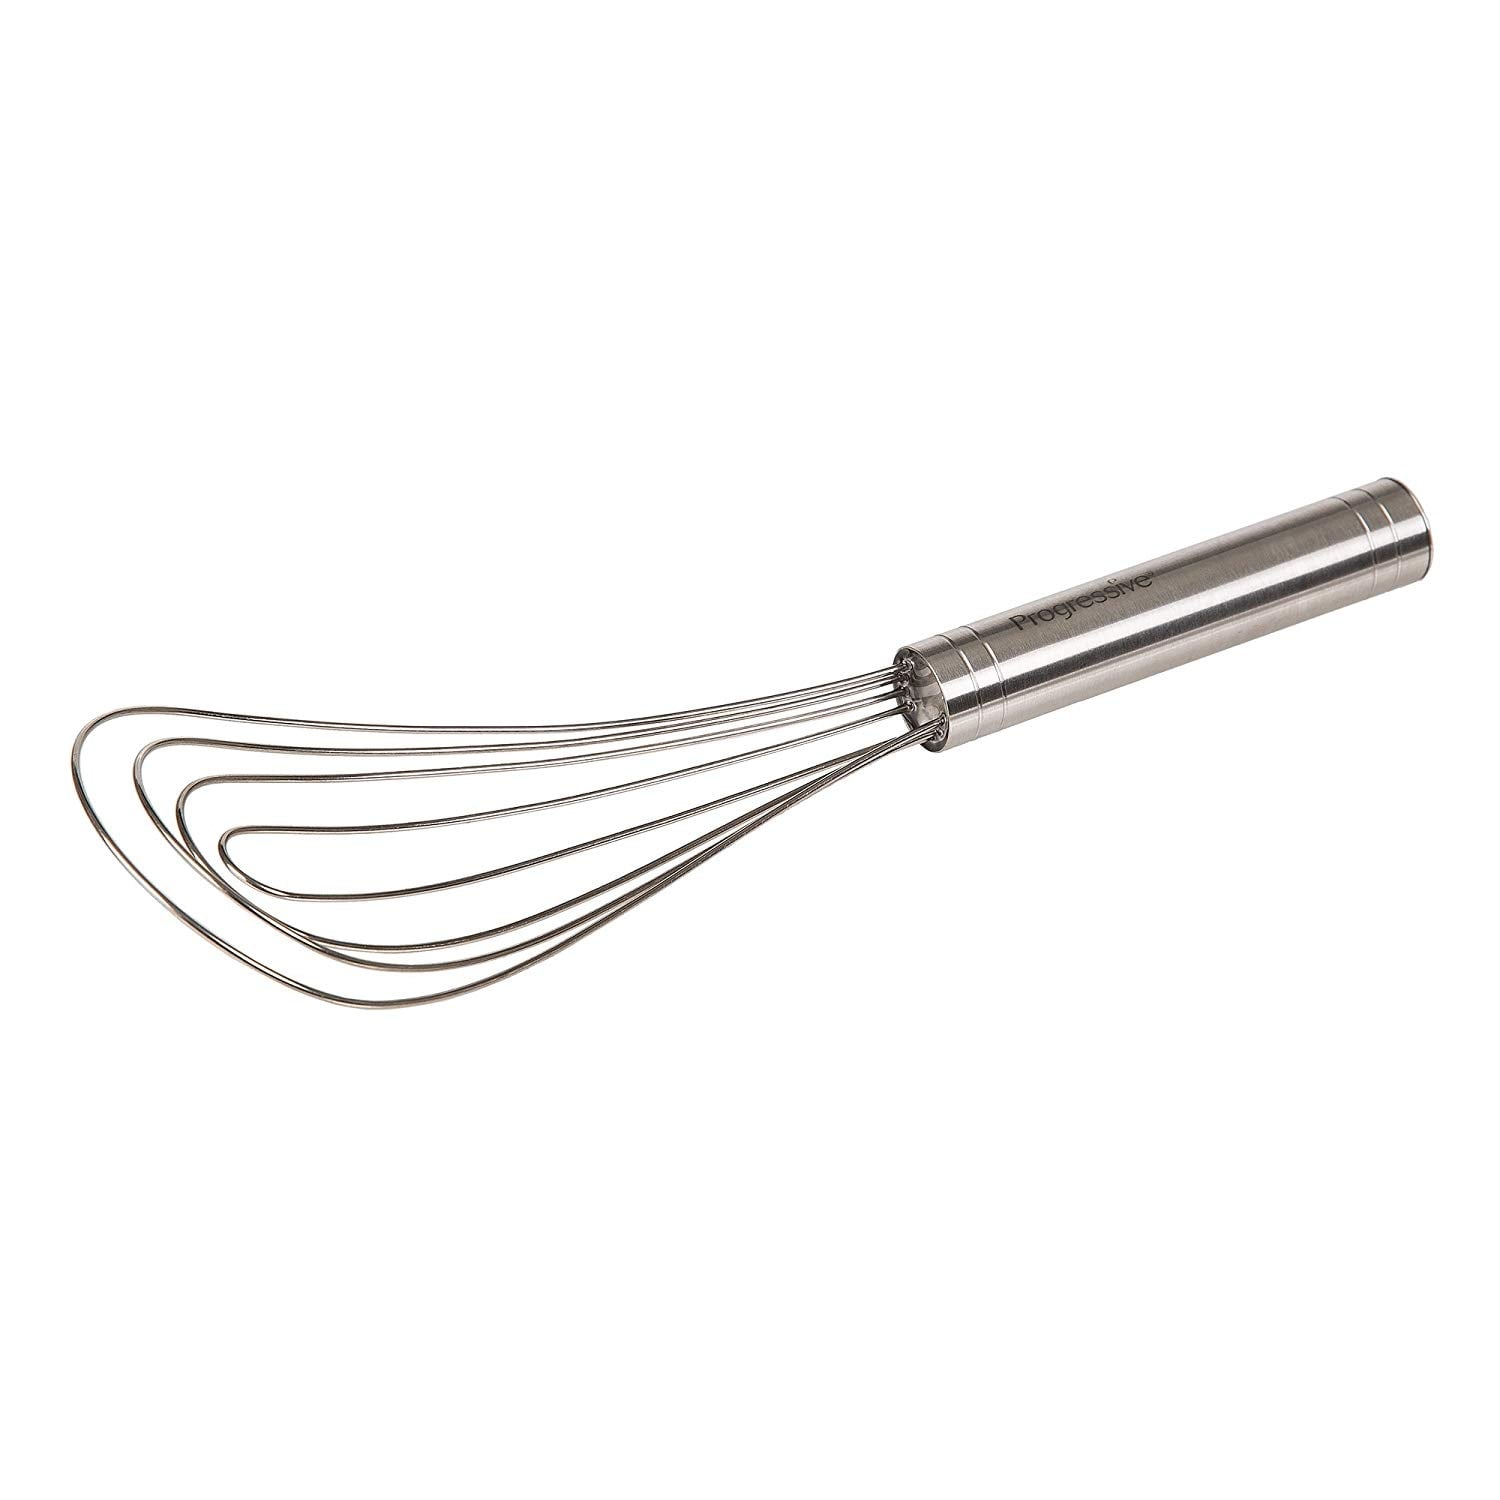 Chef Craft French Whisk Chrome Plated Steel 7 inch, Silver, 3 Pack